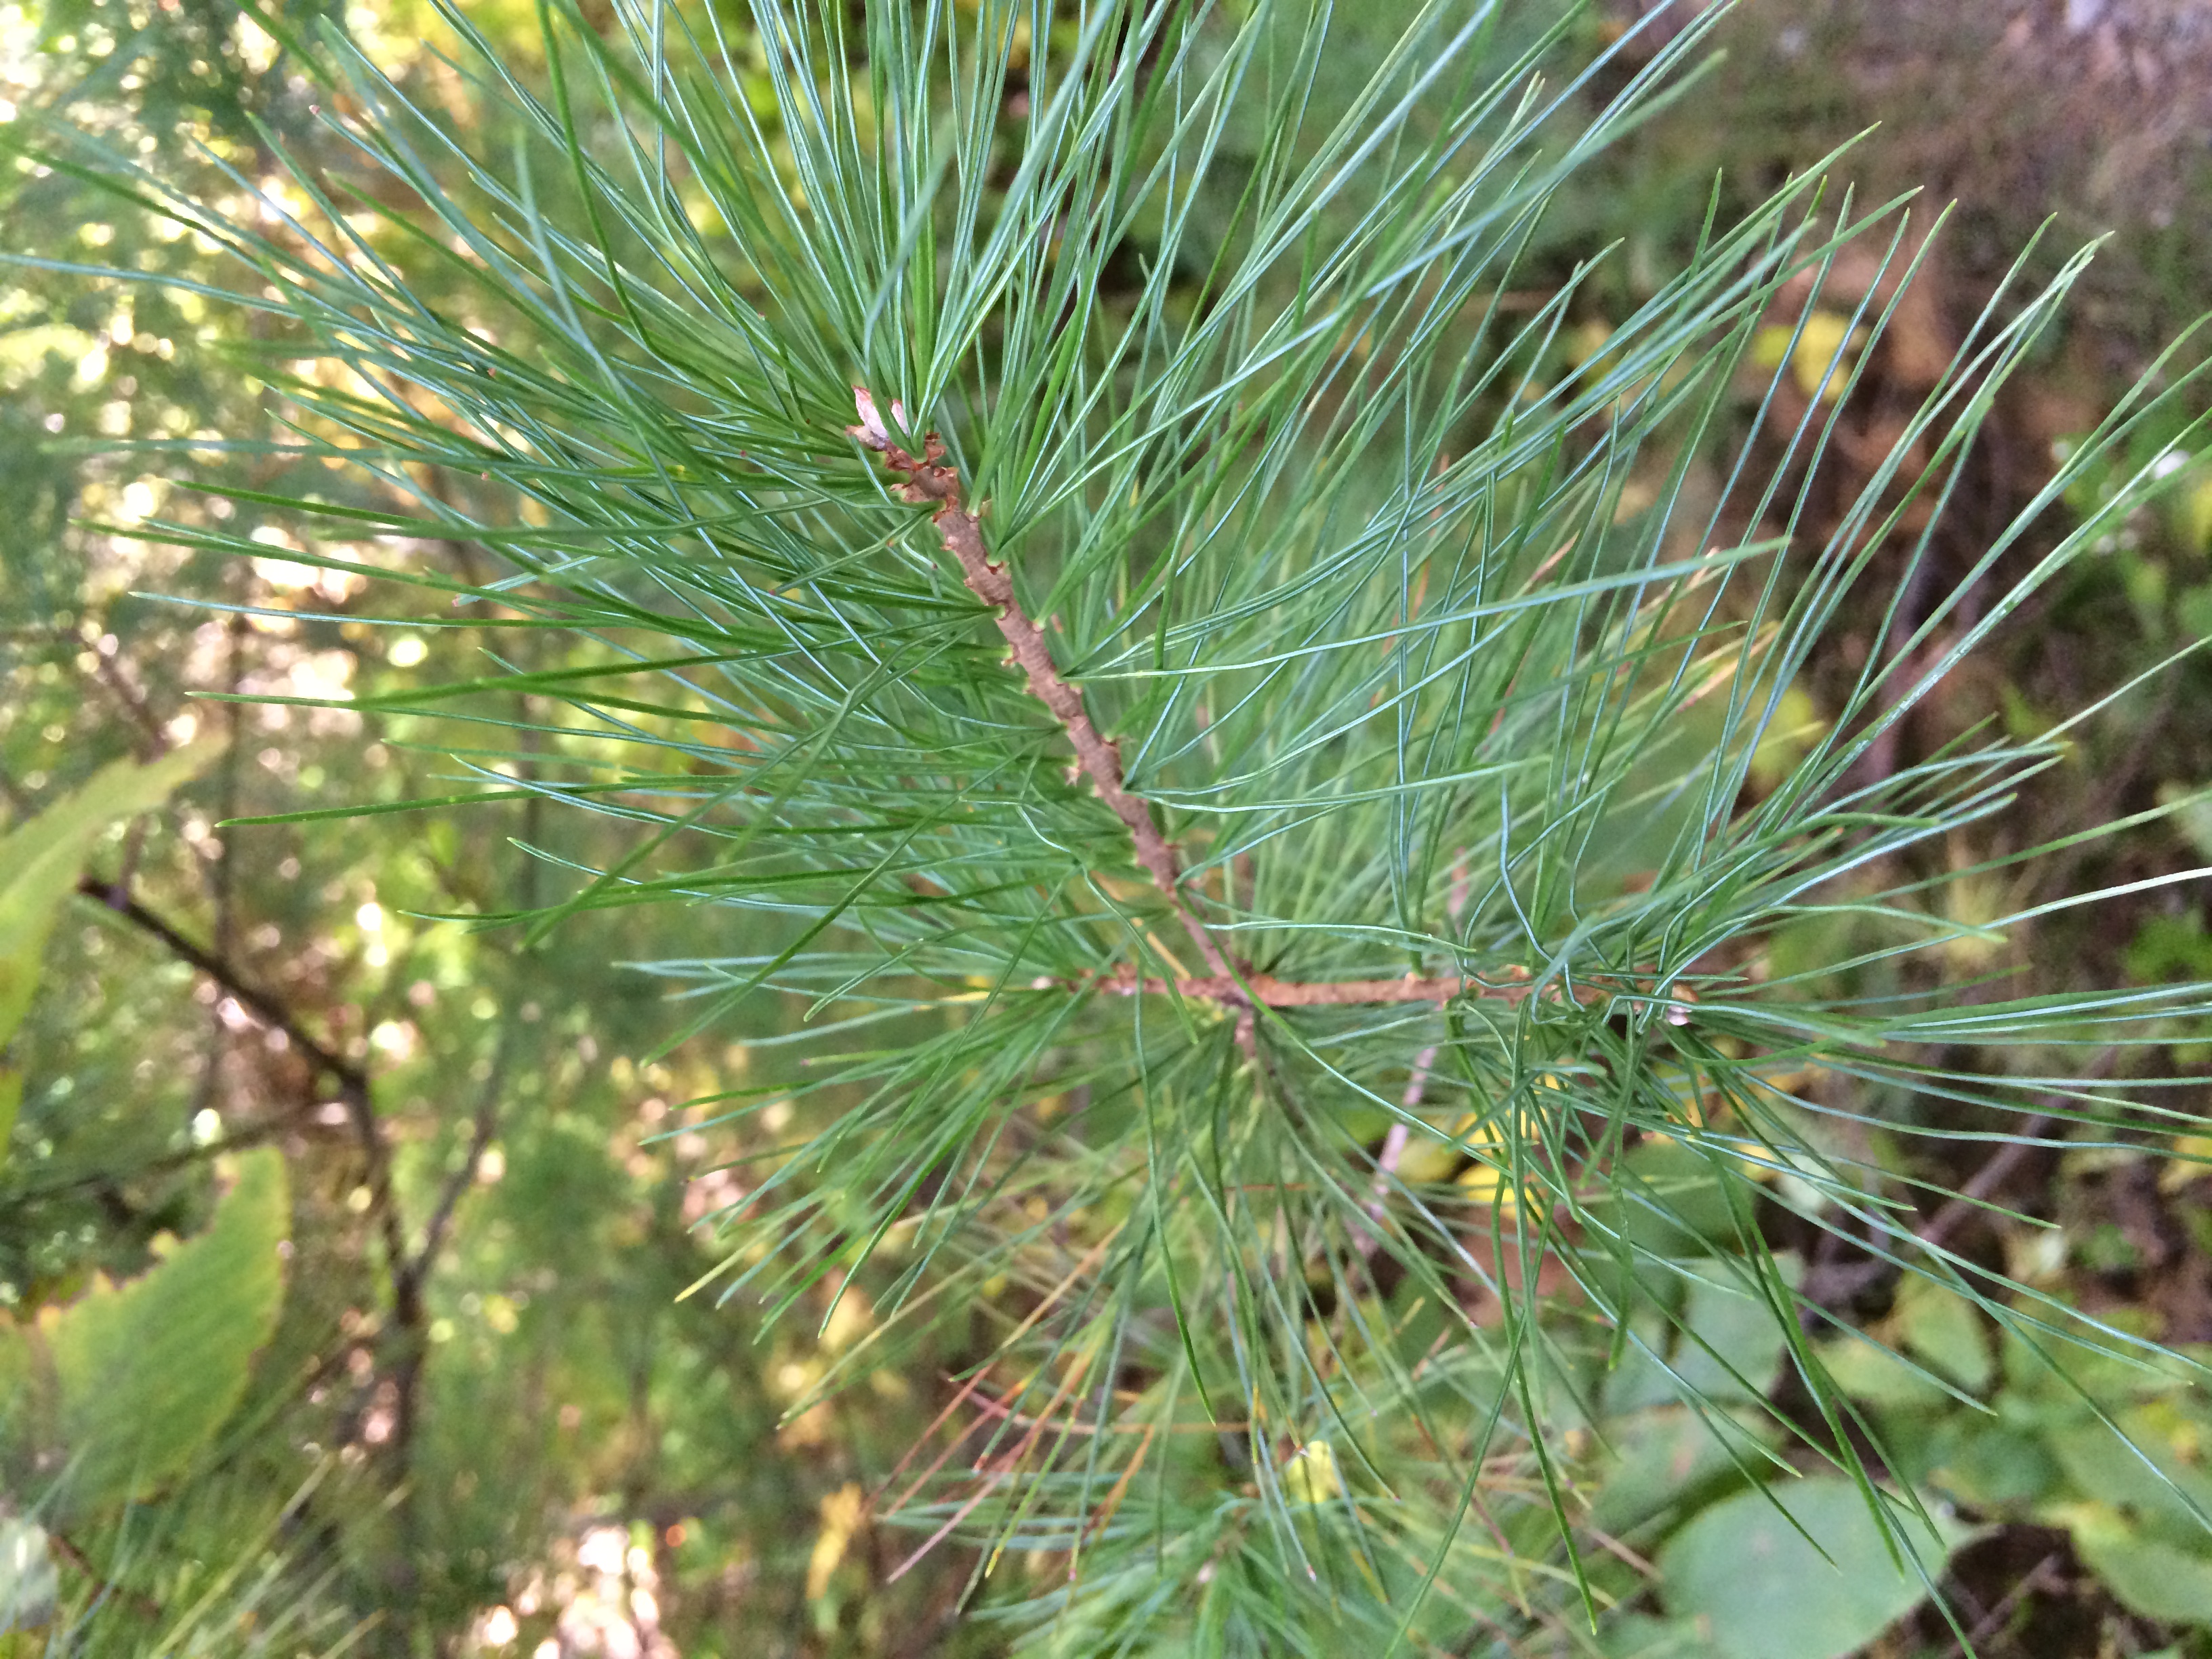 Some kind of evergreen tree